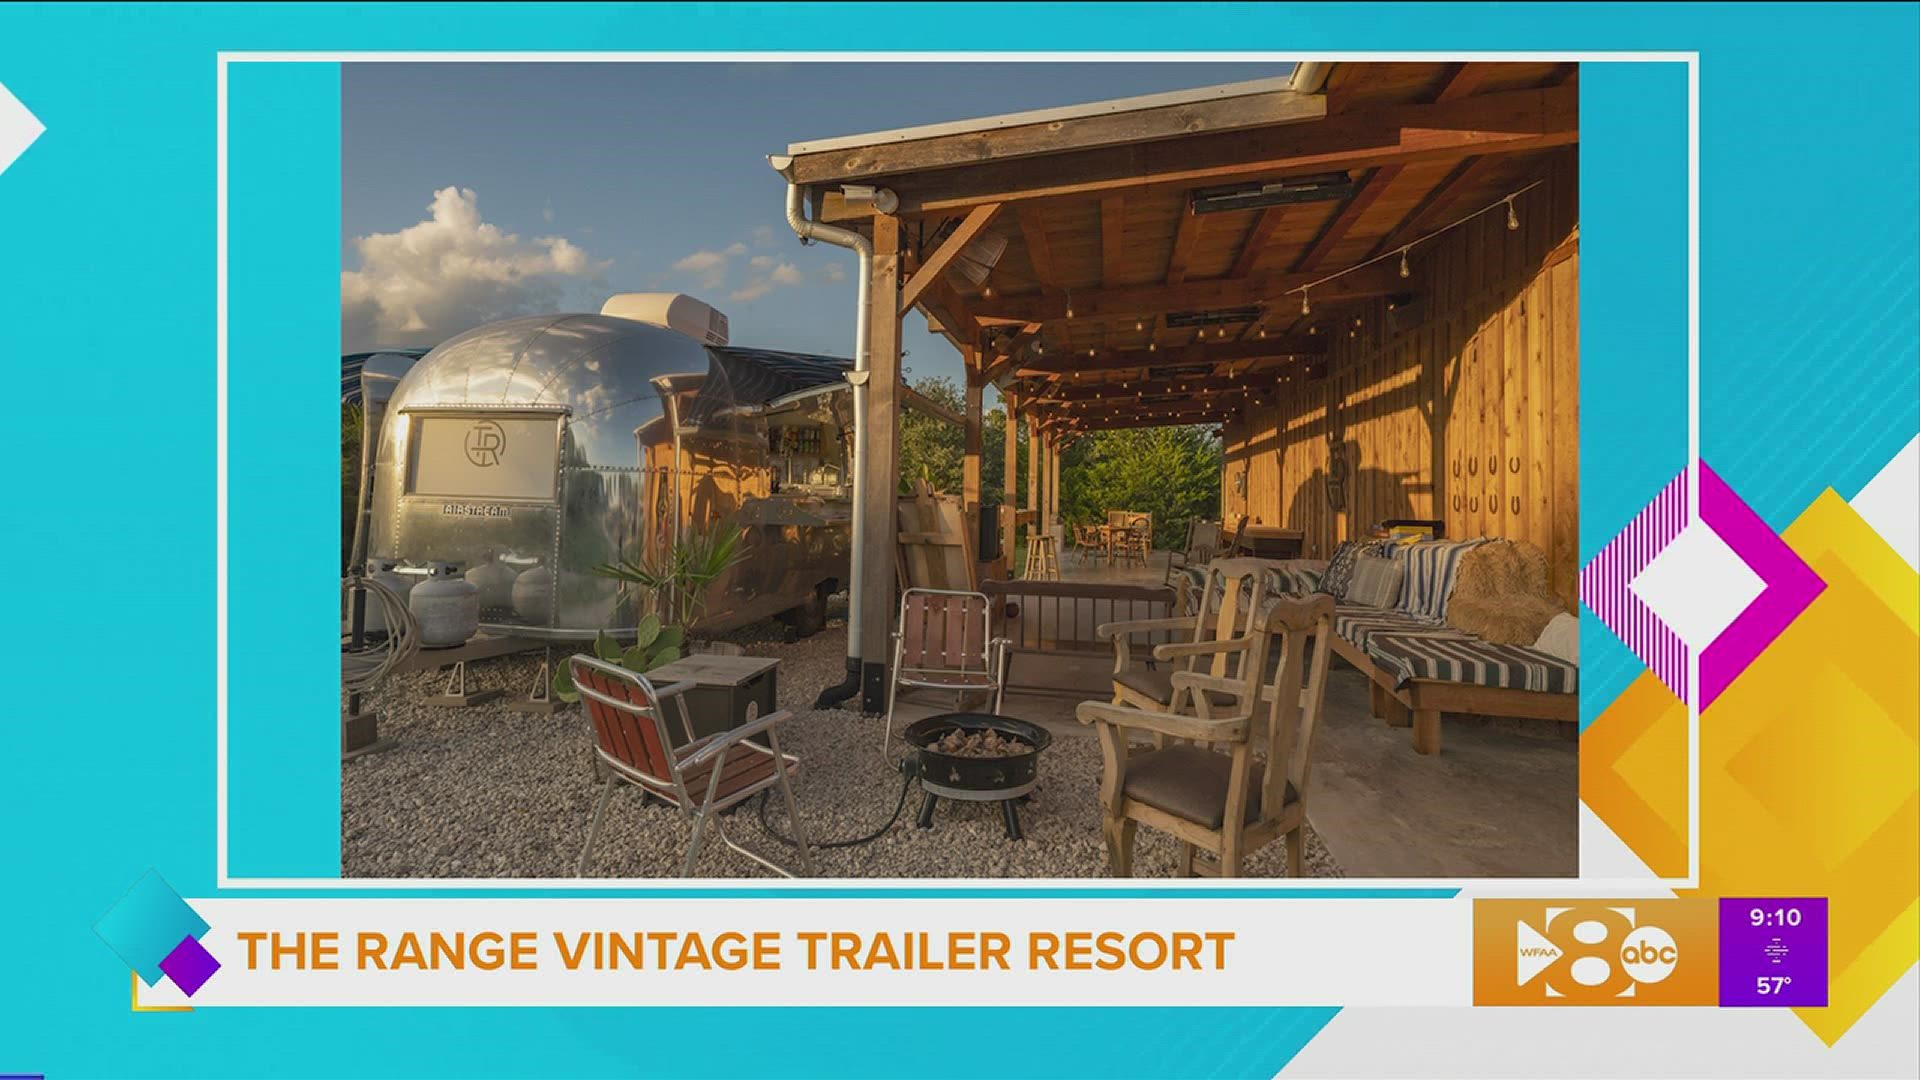 The Range Vintage Trailer Resort allows a unique getaway experience with fully restored vintage airstreams on 30 acres of countryside just in time or bluebonnet seas